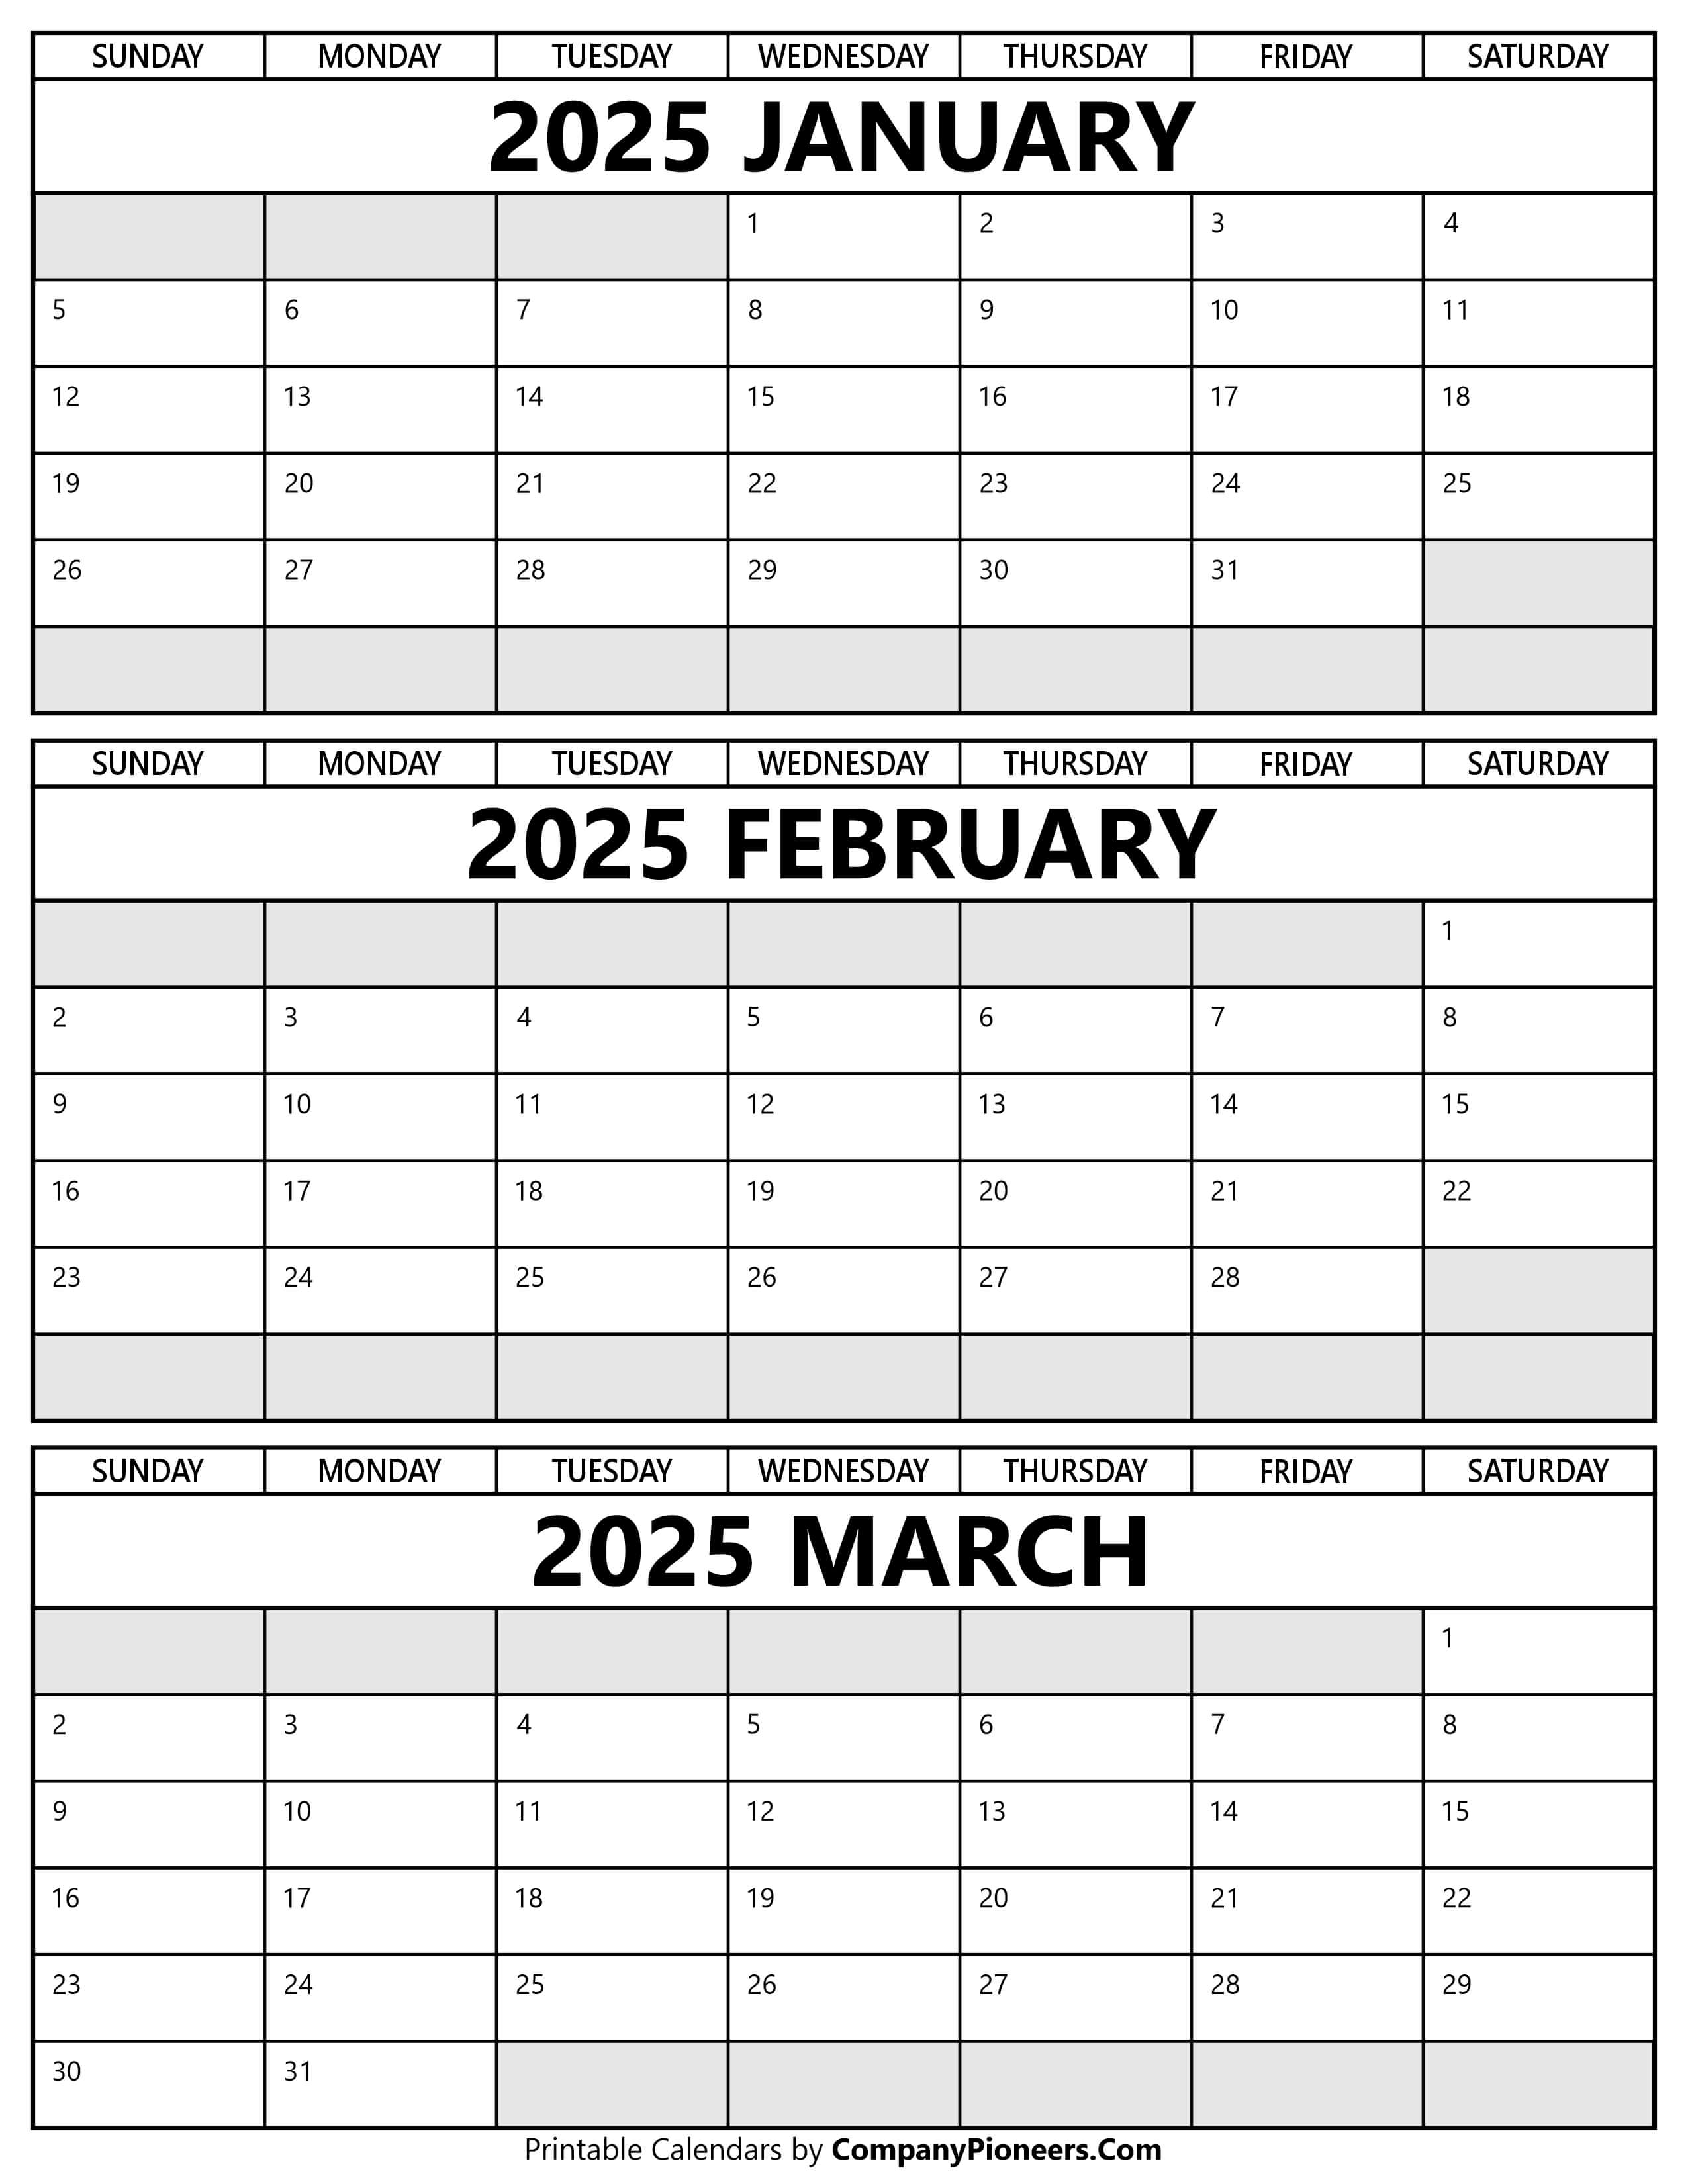 Printable January to March 2025 Calendar